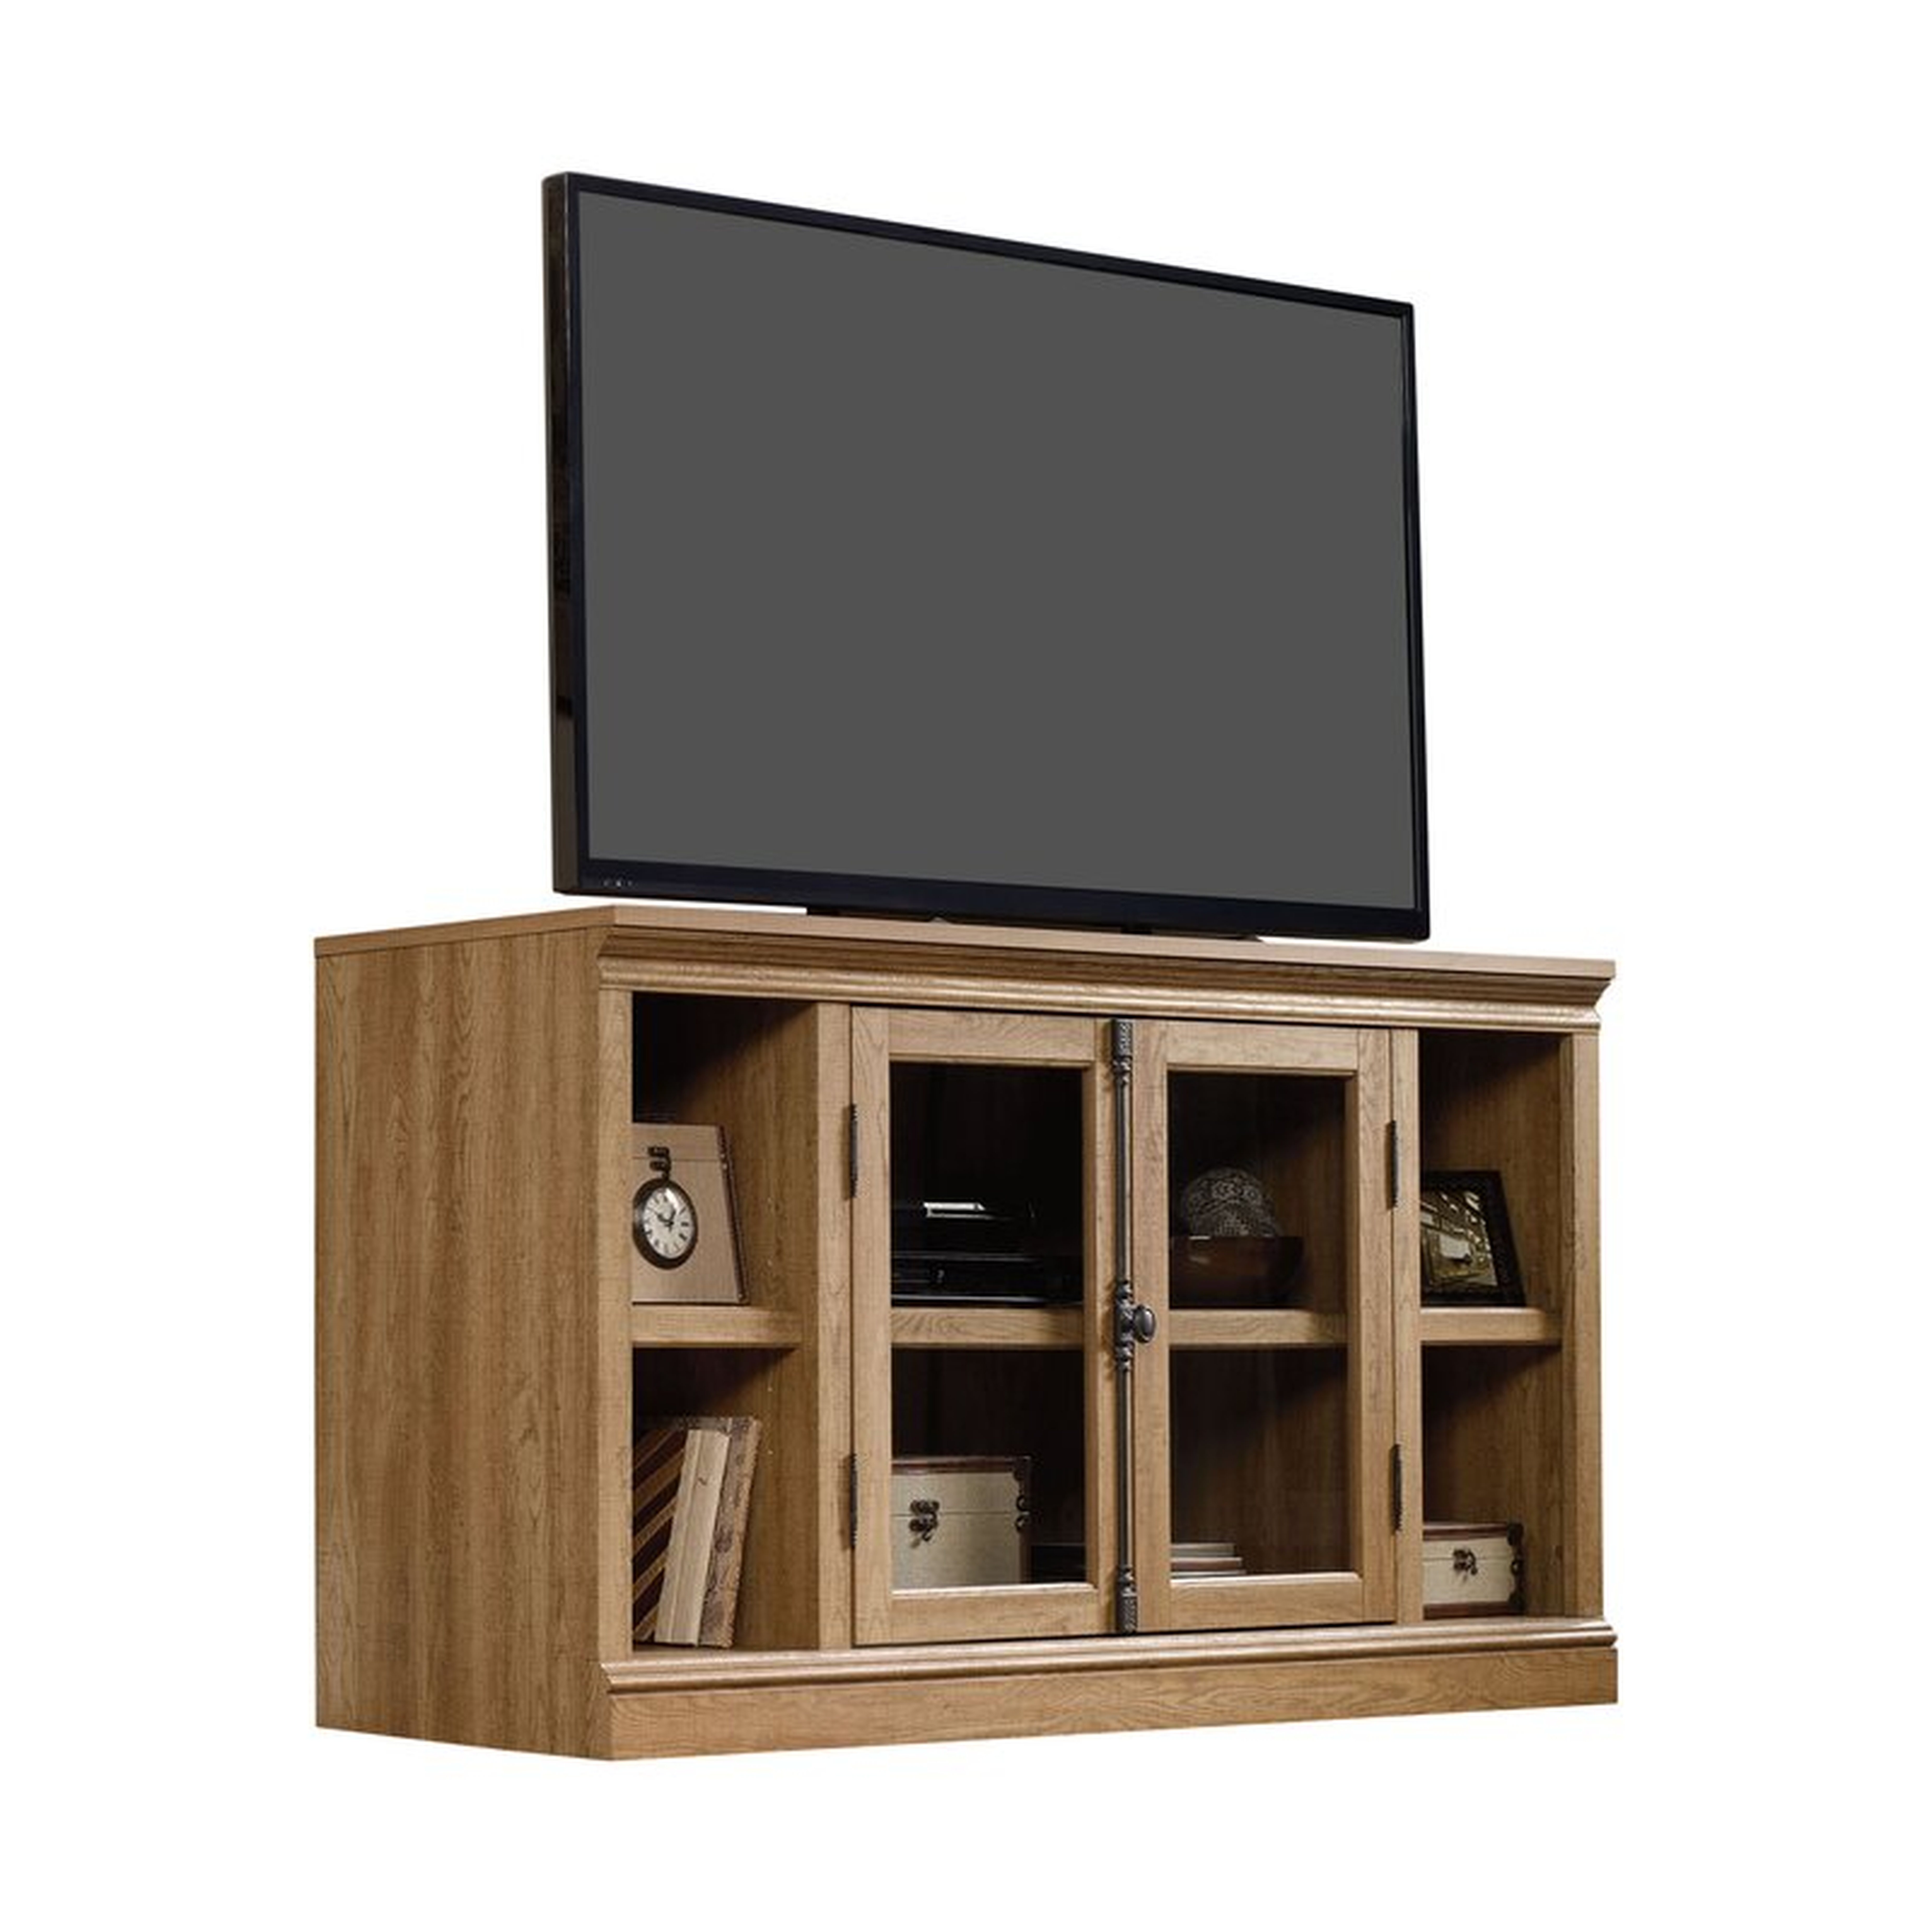 Bowerbank TV Stand for TVs up to 60" / Scribed Oak - Wayfair